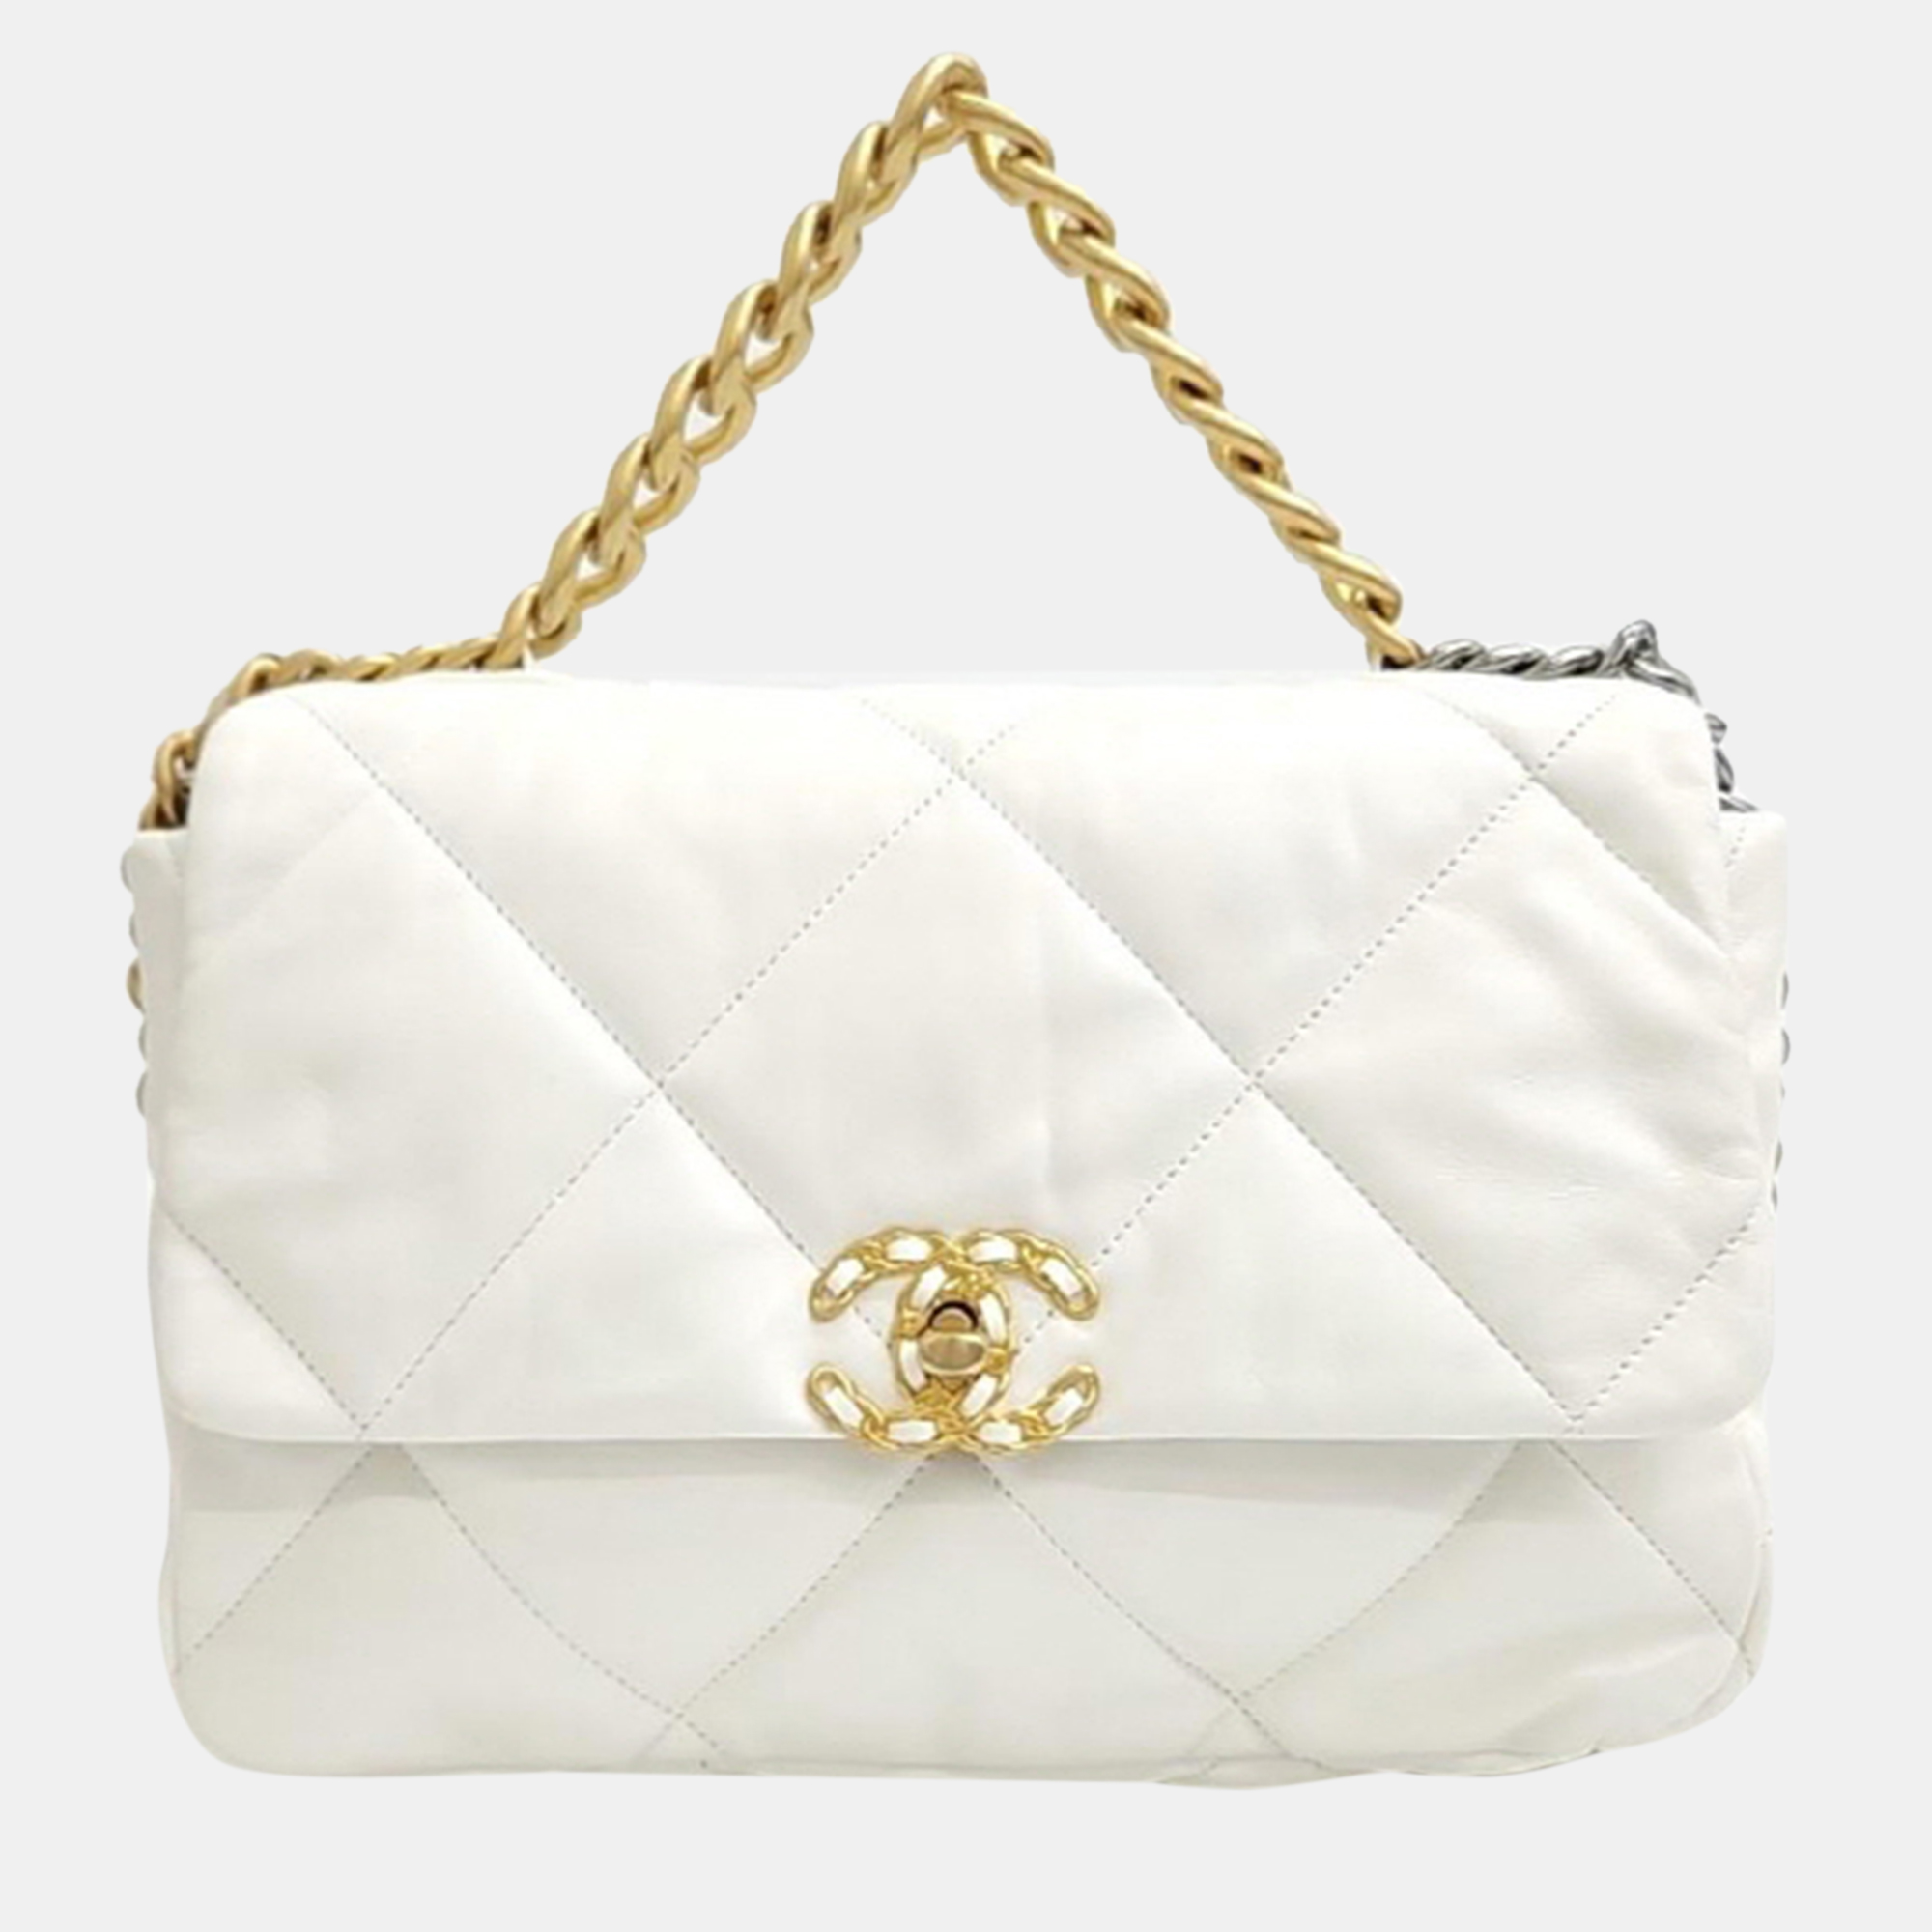 Chanel white leather 19 large flap bag